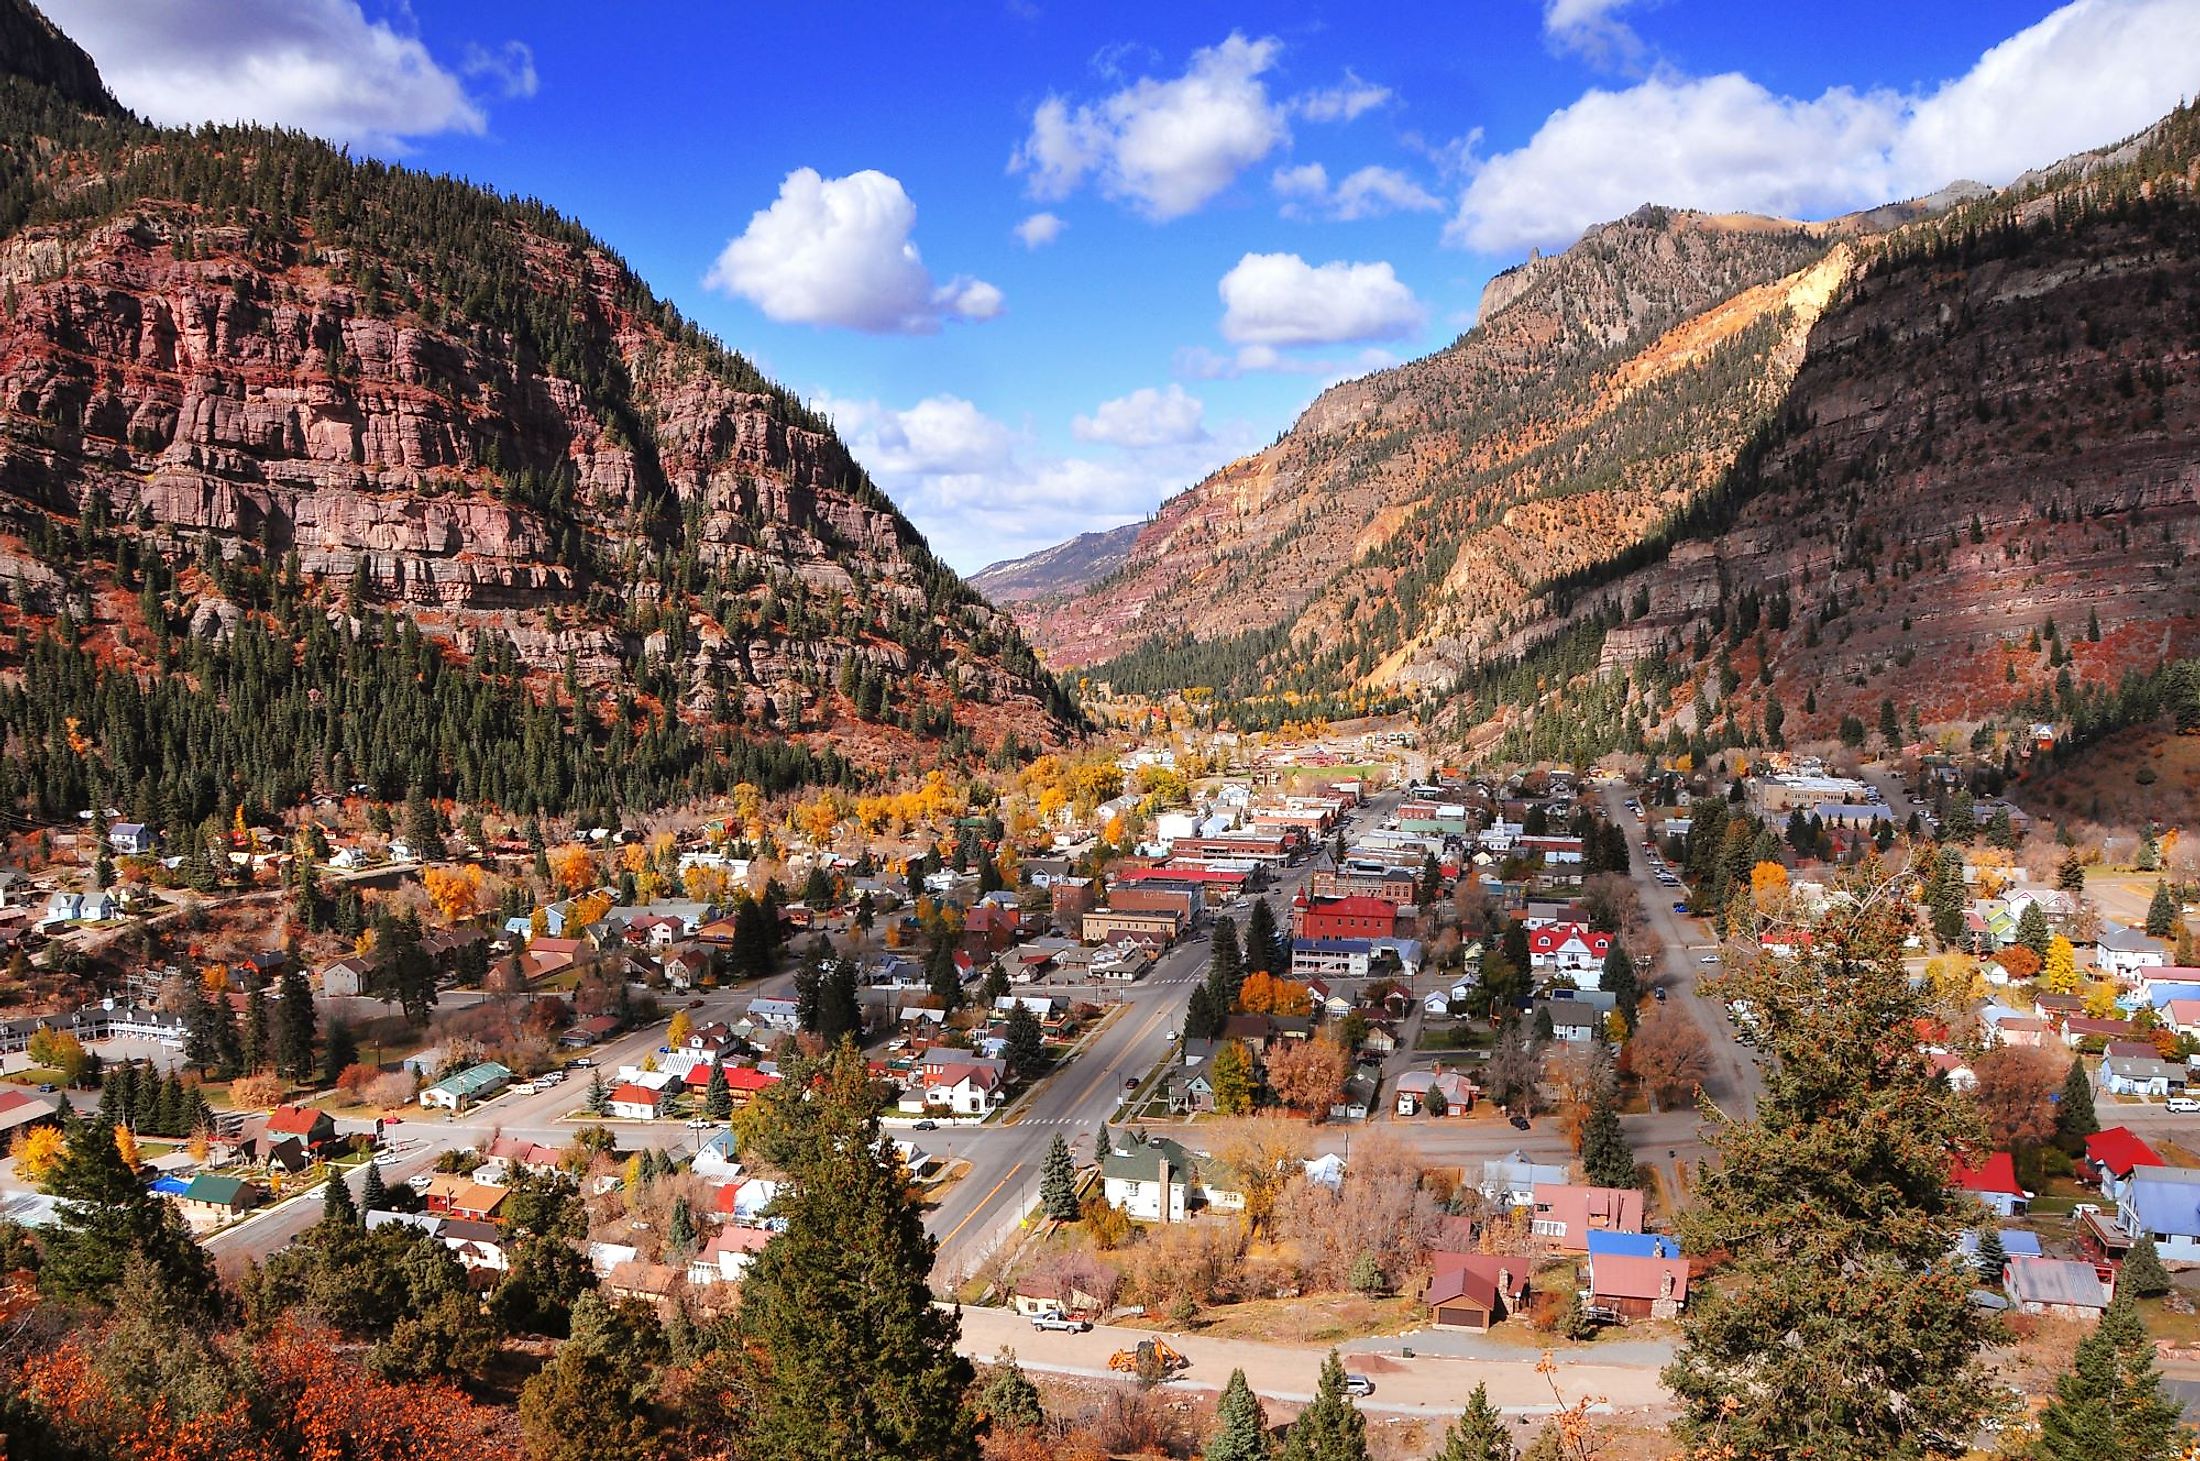 Aerial view of Ouray, Colorado